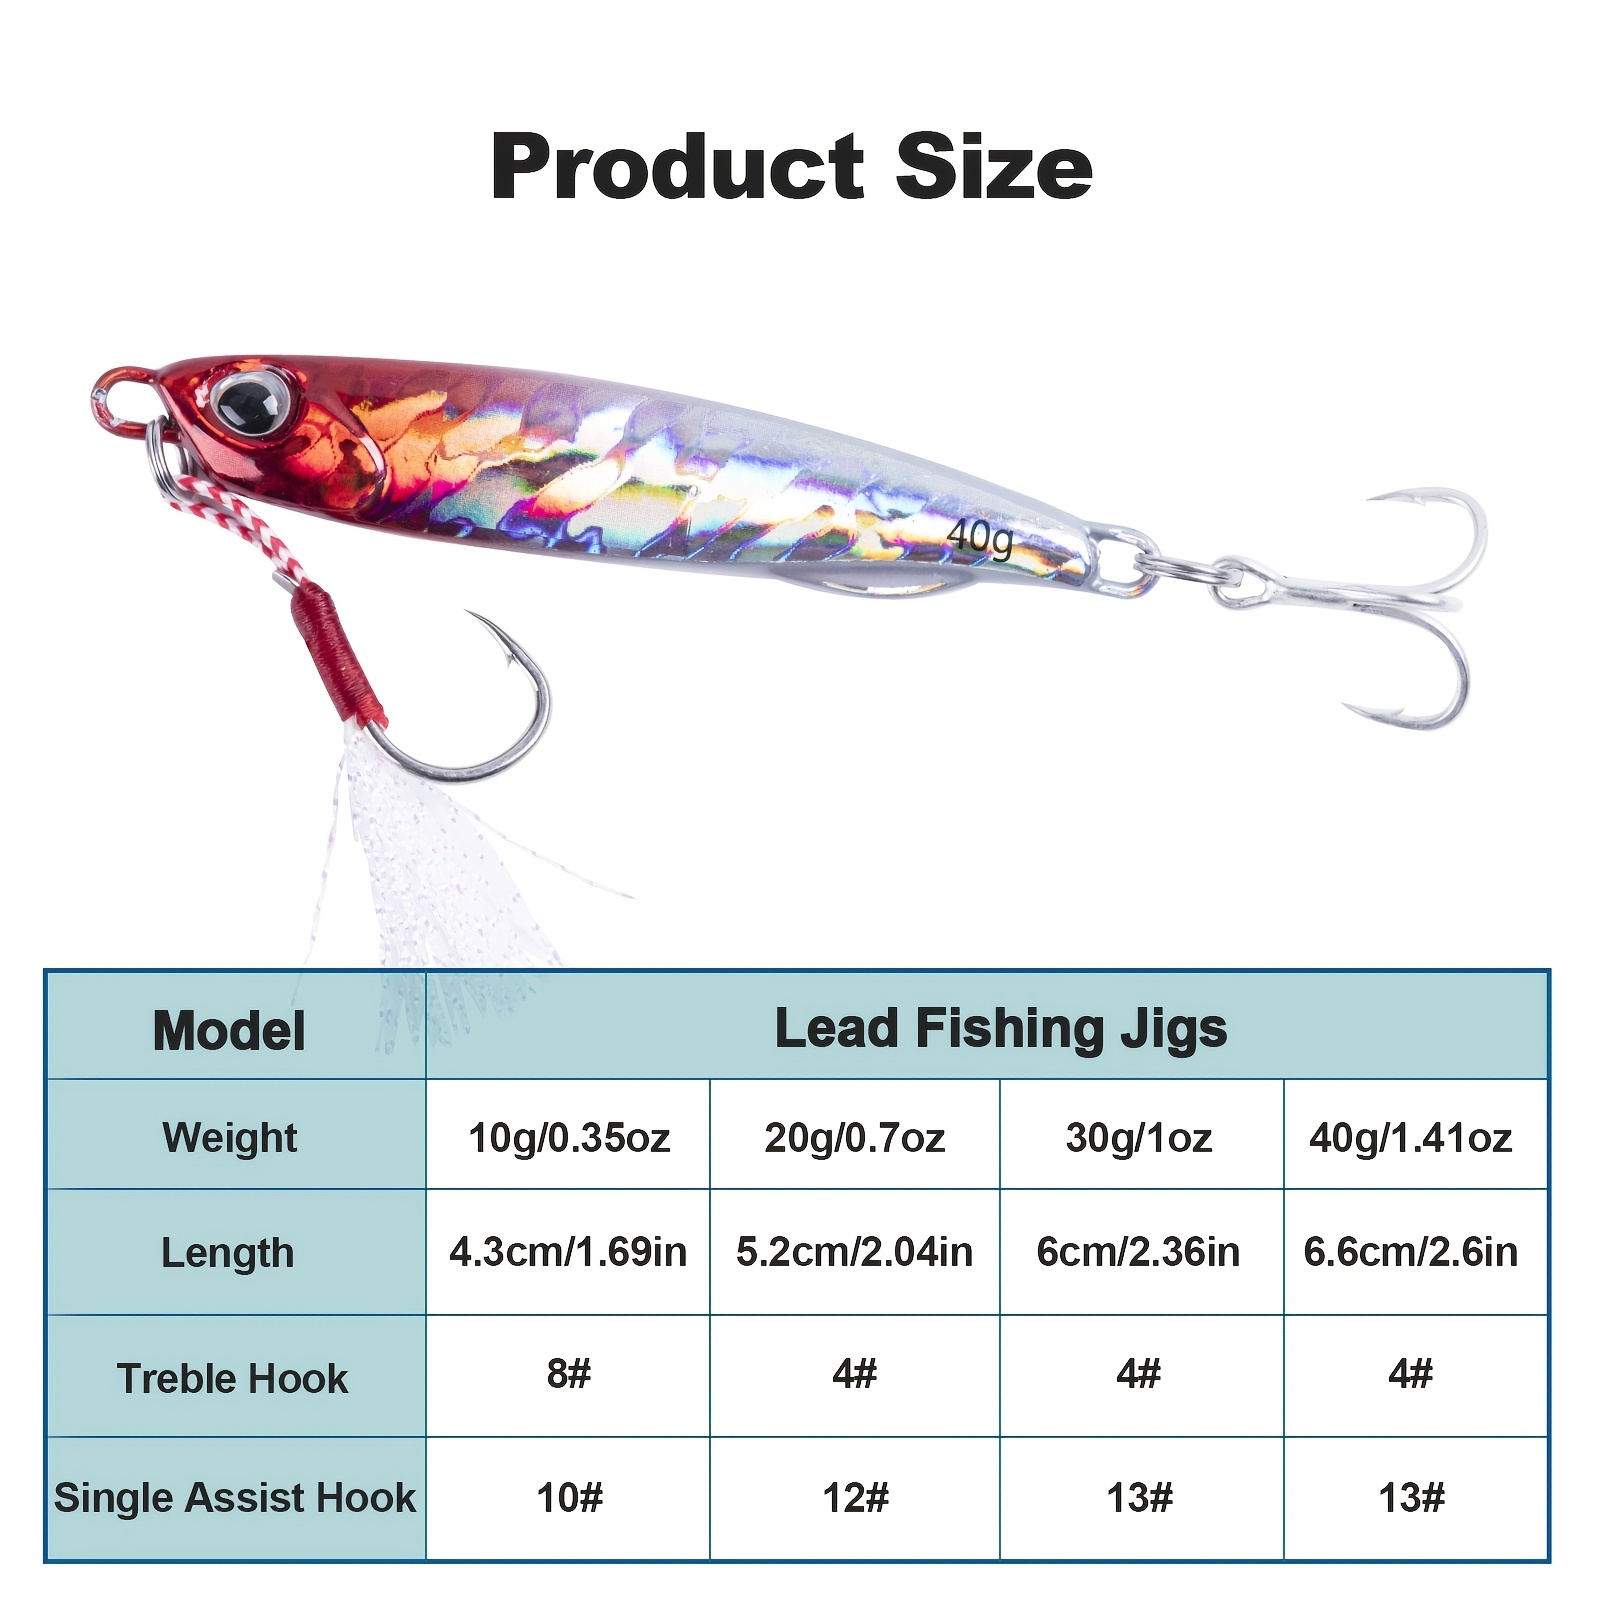 Goture Fishing Jigs,20g 30g 40G Vertical Jig Saltwater Freshwater, Jig Fishing Lures with Assist Hook and Treble Hook,5PCS Fishing Jigging Spoon